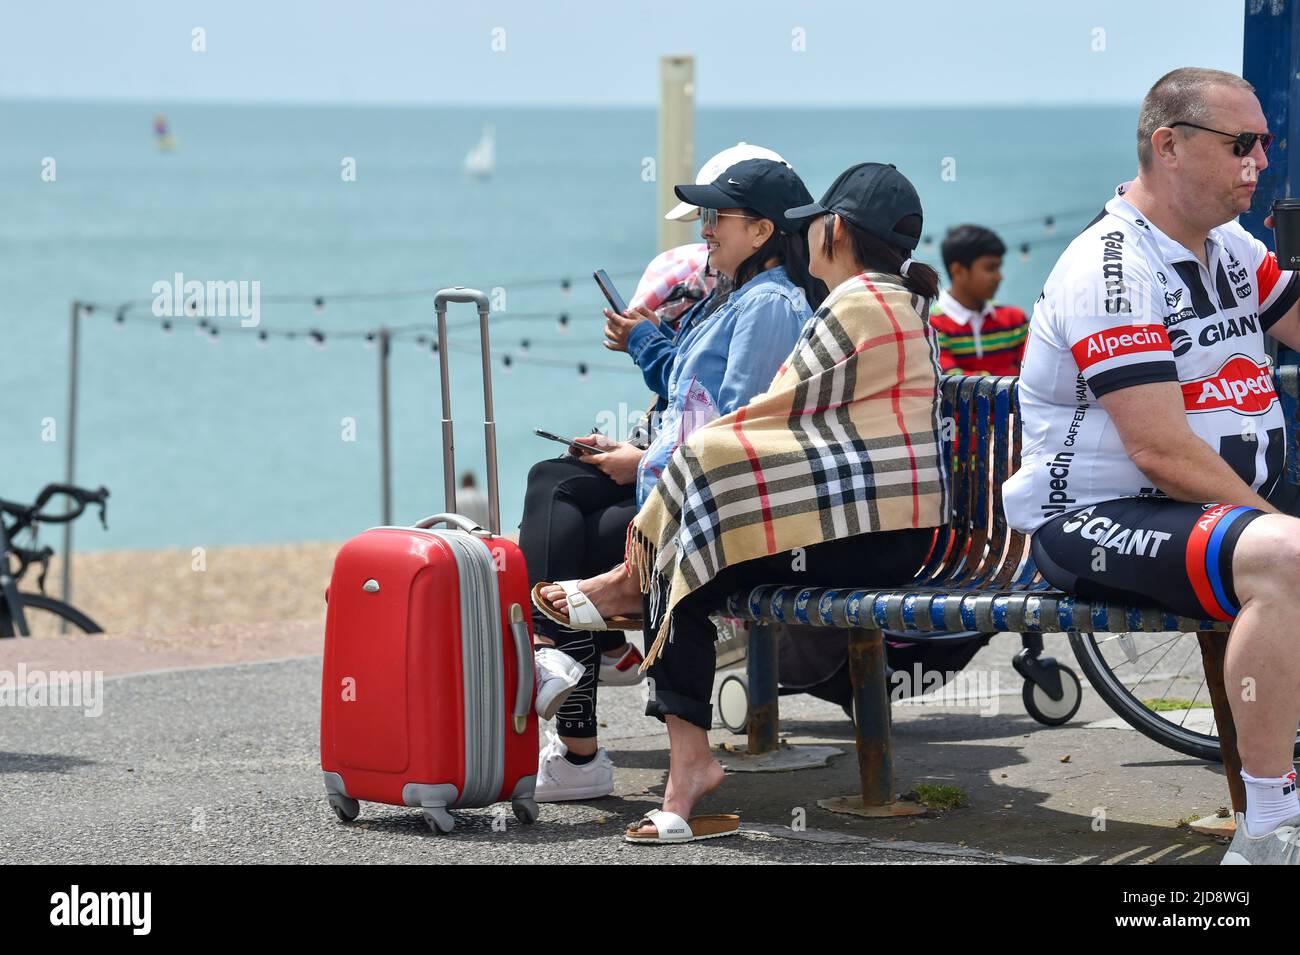 Brighton UK 19th June 2022 - Visitors wrapped up in warm clothing on Brighton seafront at lunchtime today as cooler weather spreads across Britain after the recent hot spell .   : Credit Simon Dack / Alamy Live News Stock Photo